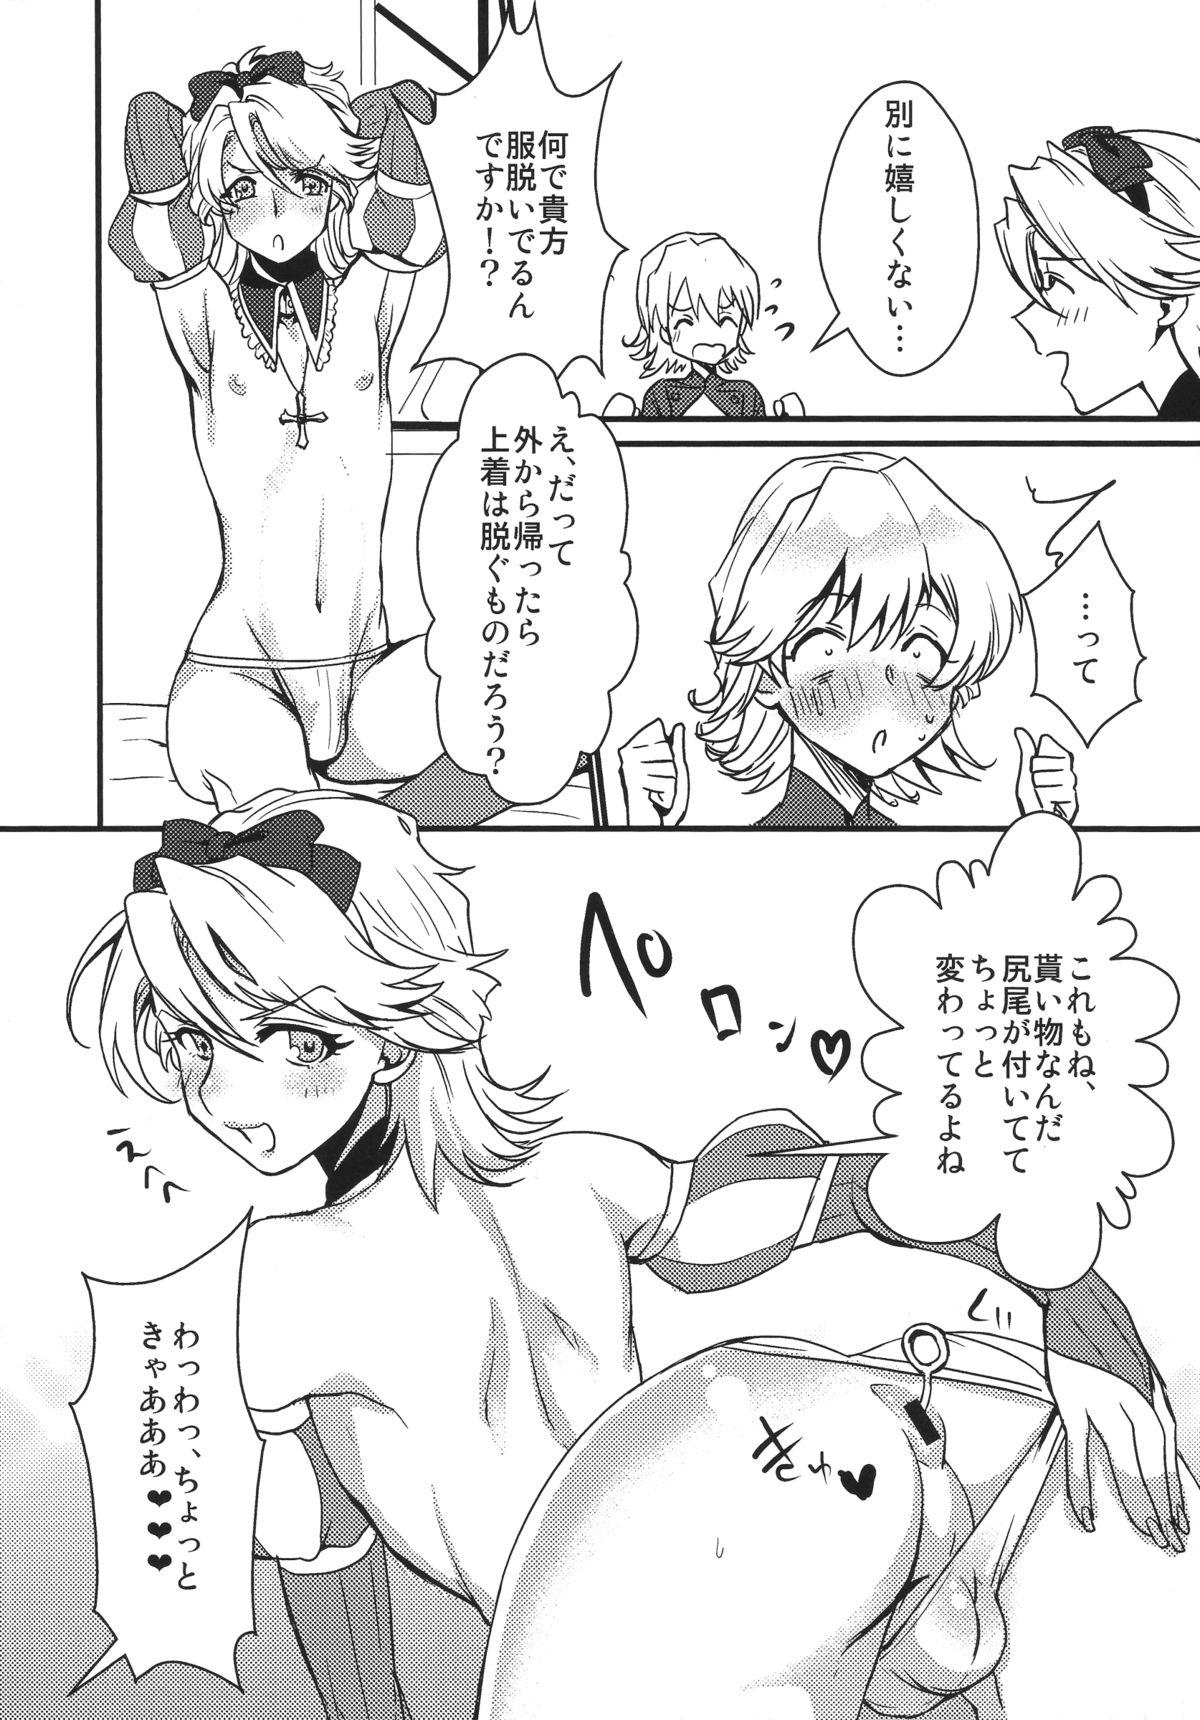 Toys The eve - Tiger and bunny Babe - Page 11